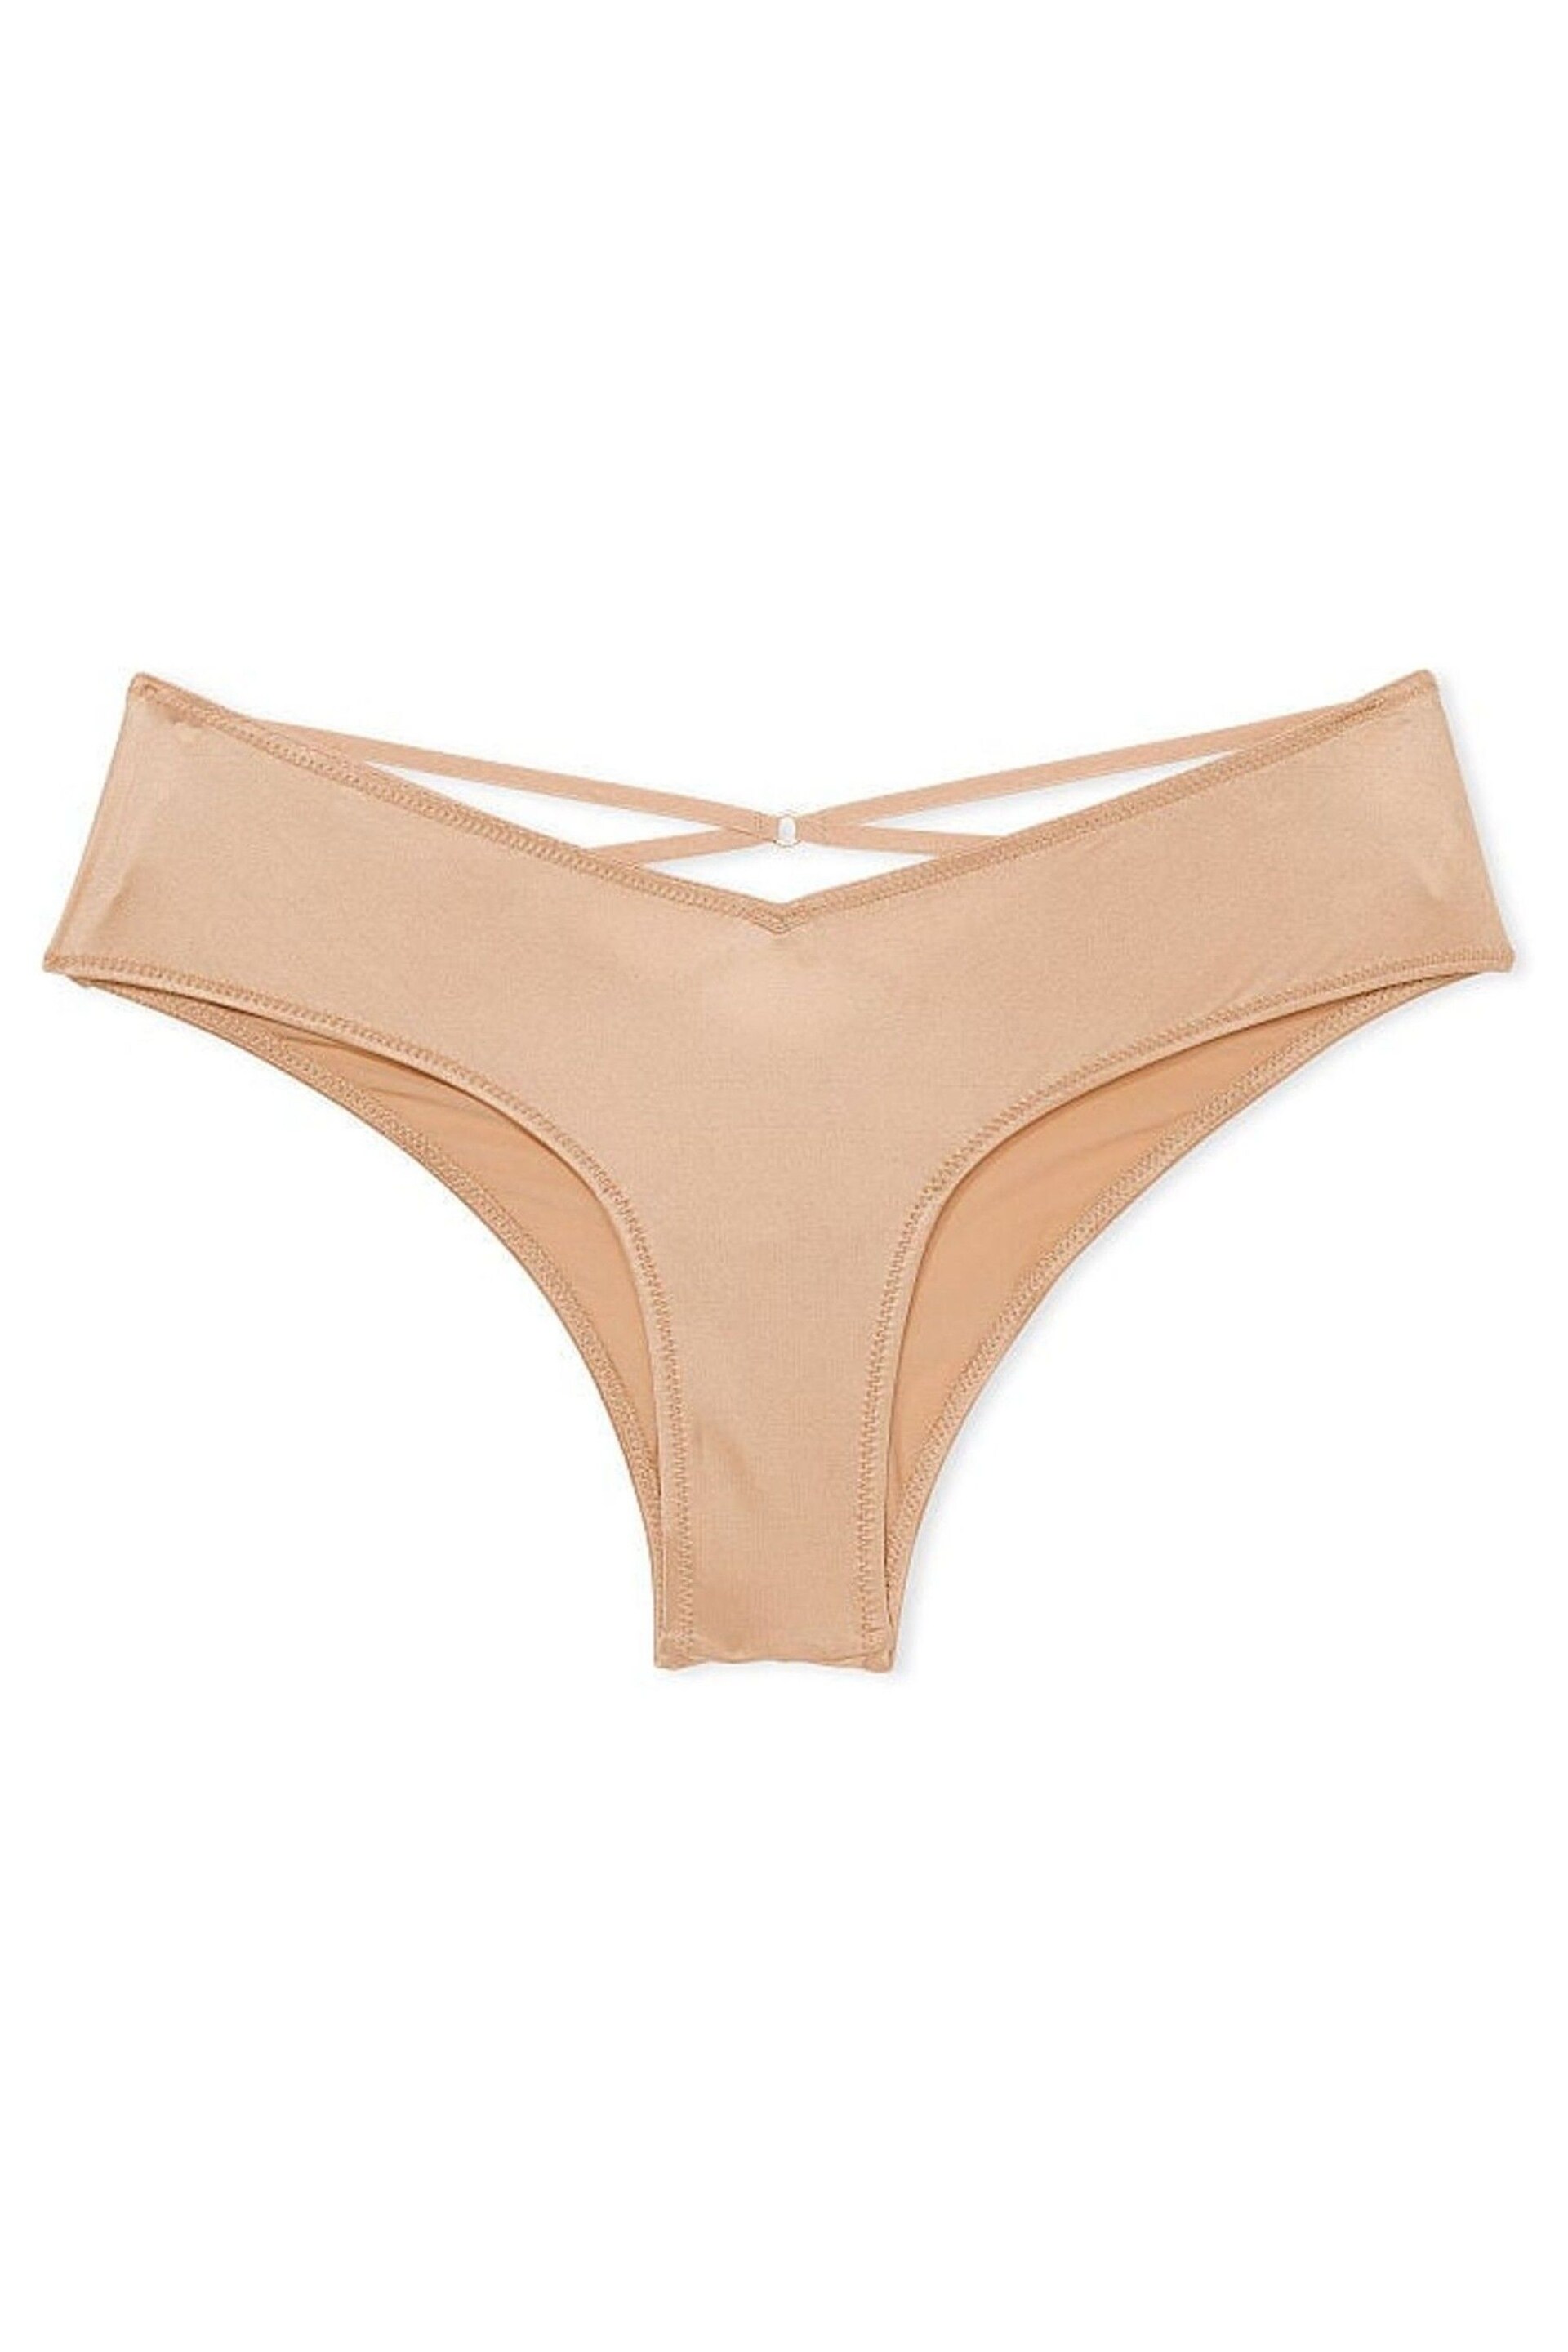 Victoria's Secret Praline Nude Cheeky Knickers - Image 1 of 1